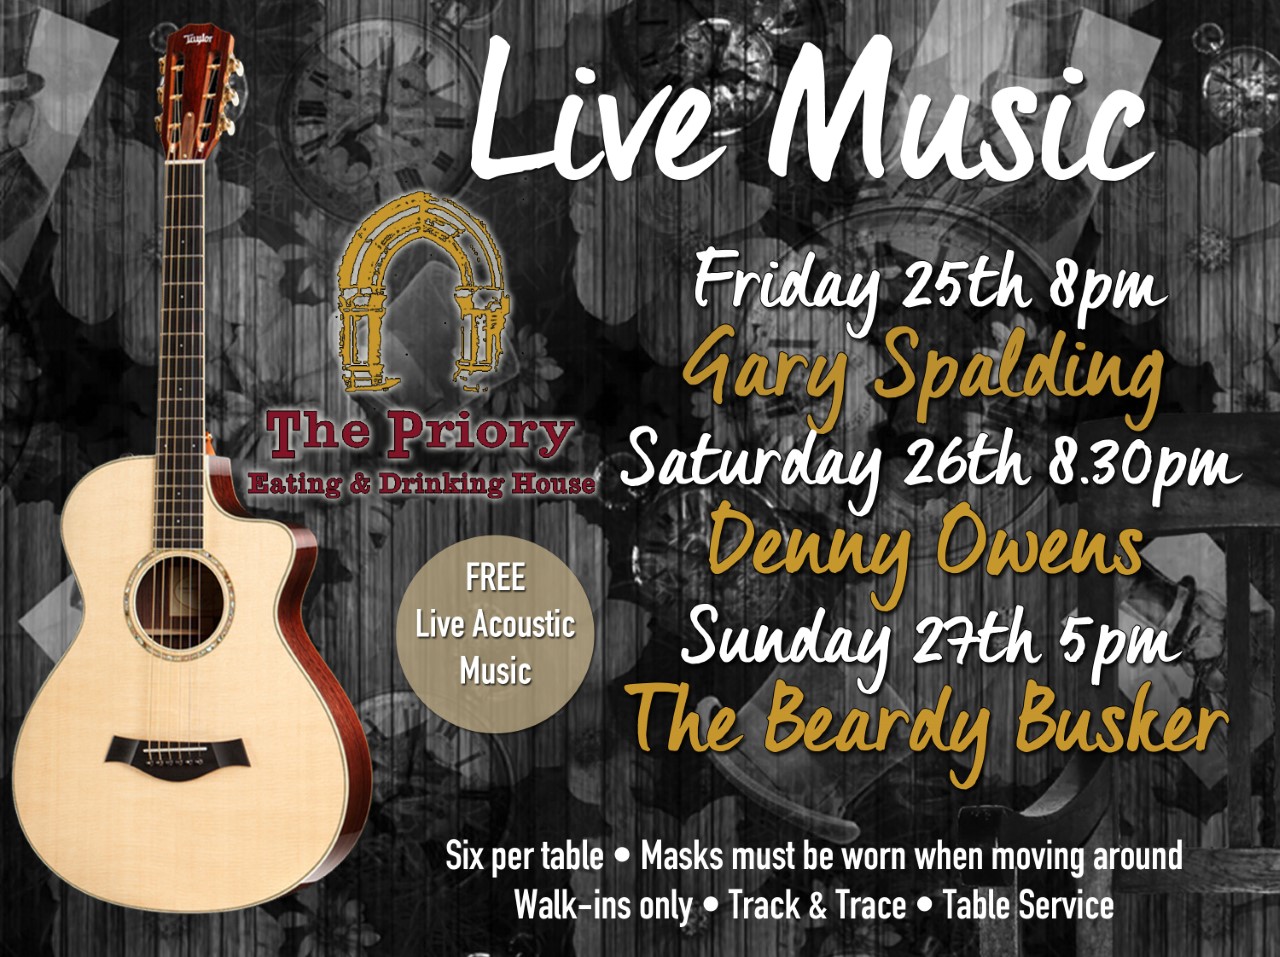 Live Music EVERY FRIDAY, SATURDAY and SUNDAY